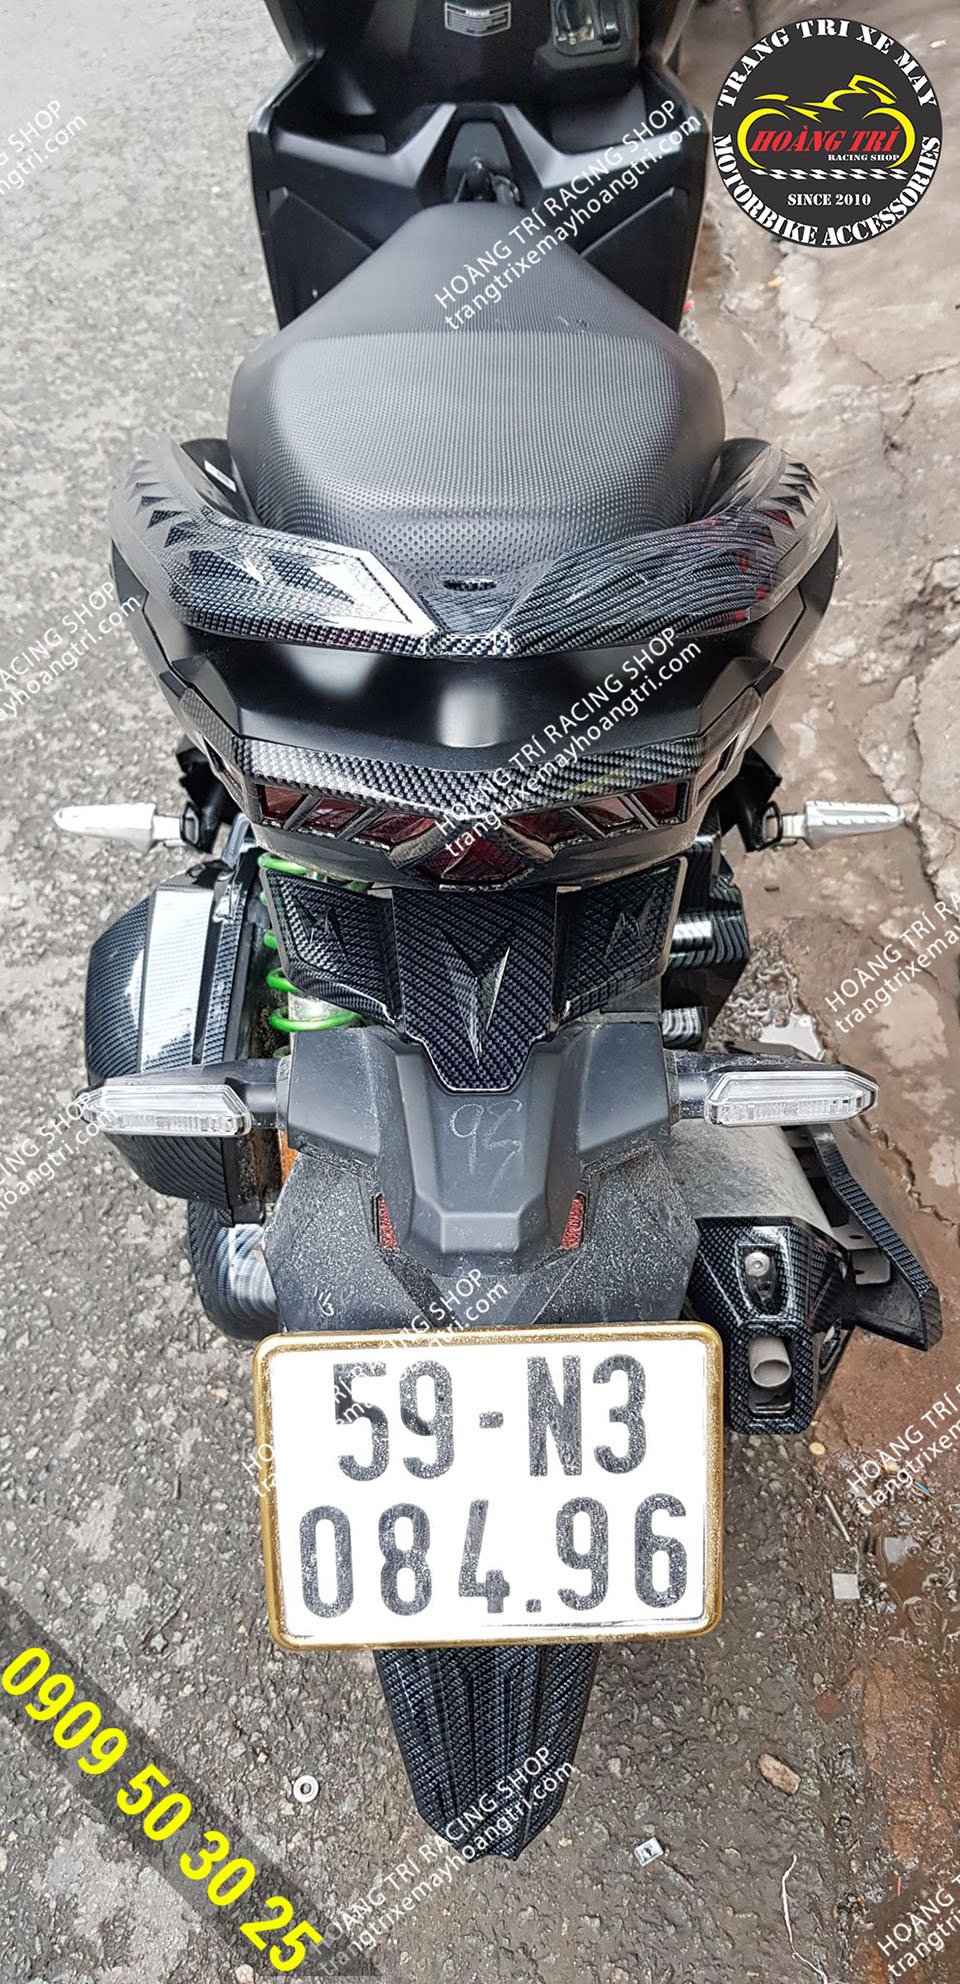 Vario tail lights - Click 2018 with Carbon paint